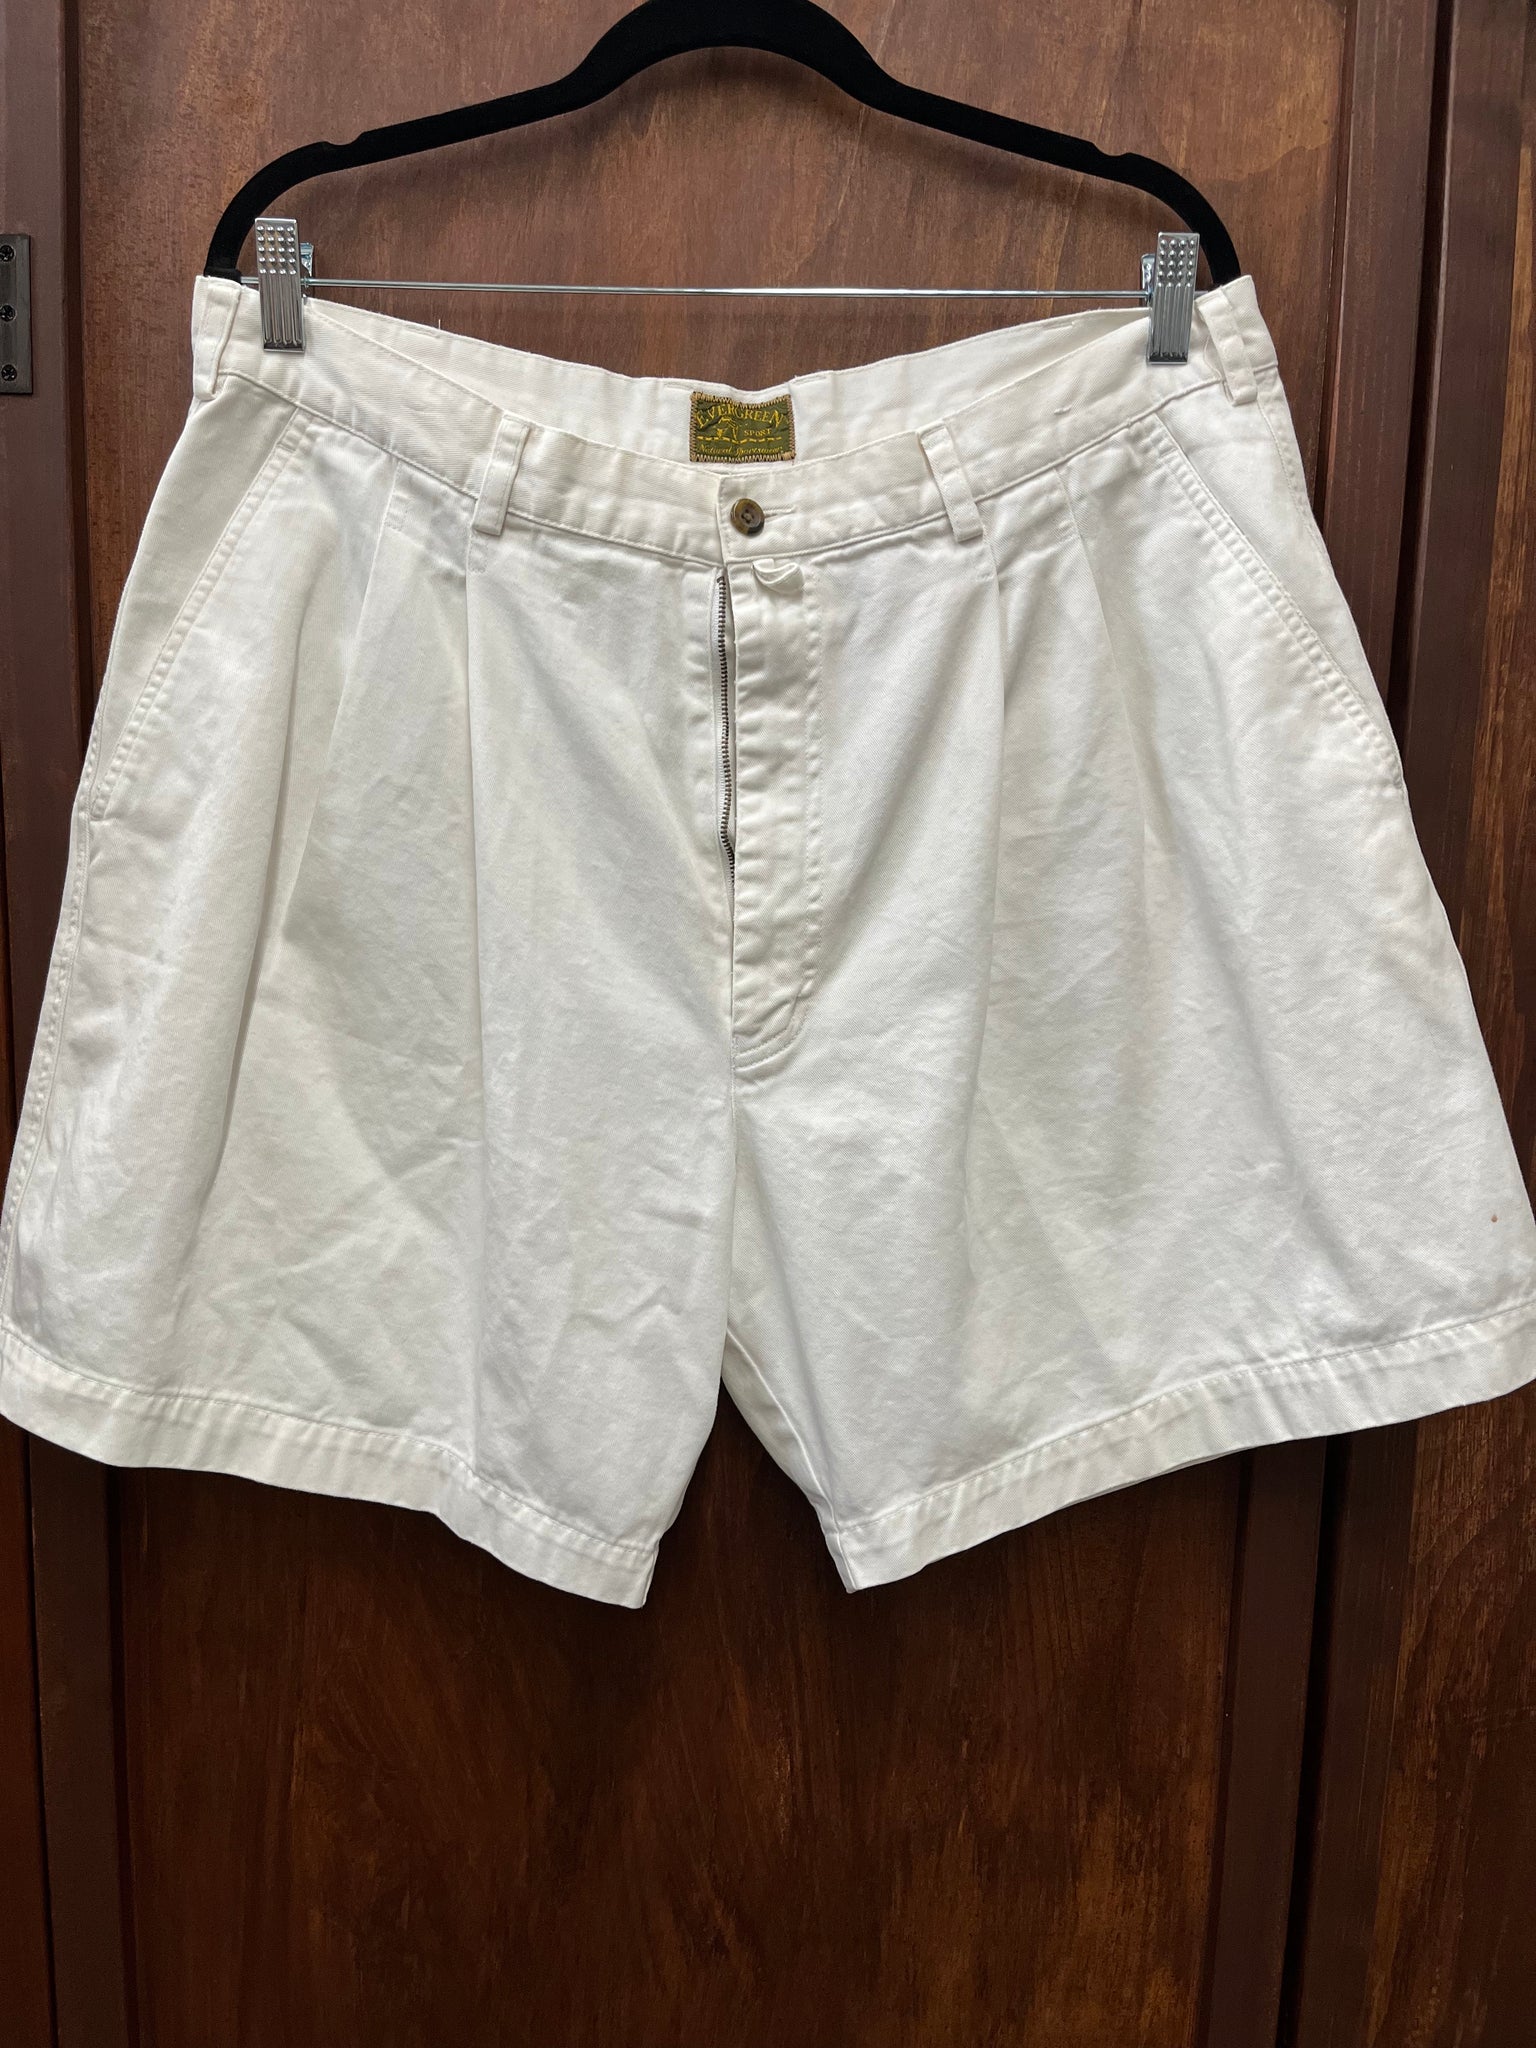 1990s MENS SHORTS- Evergreen white pleated